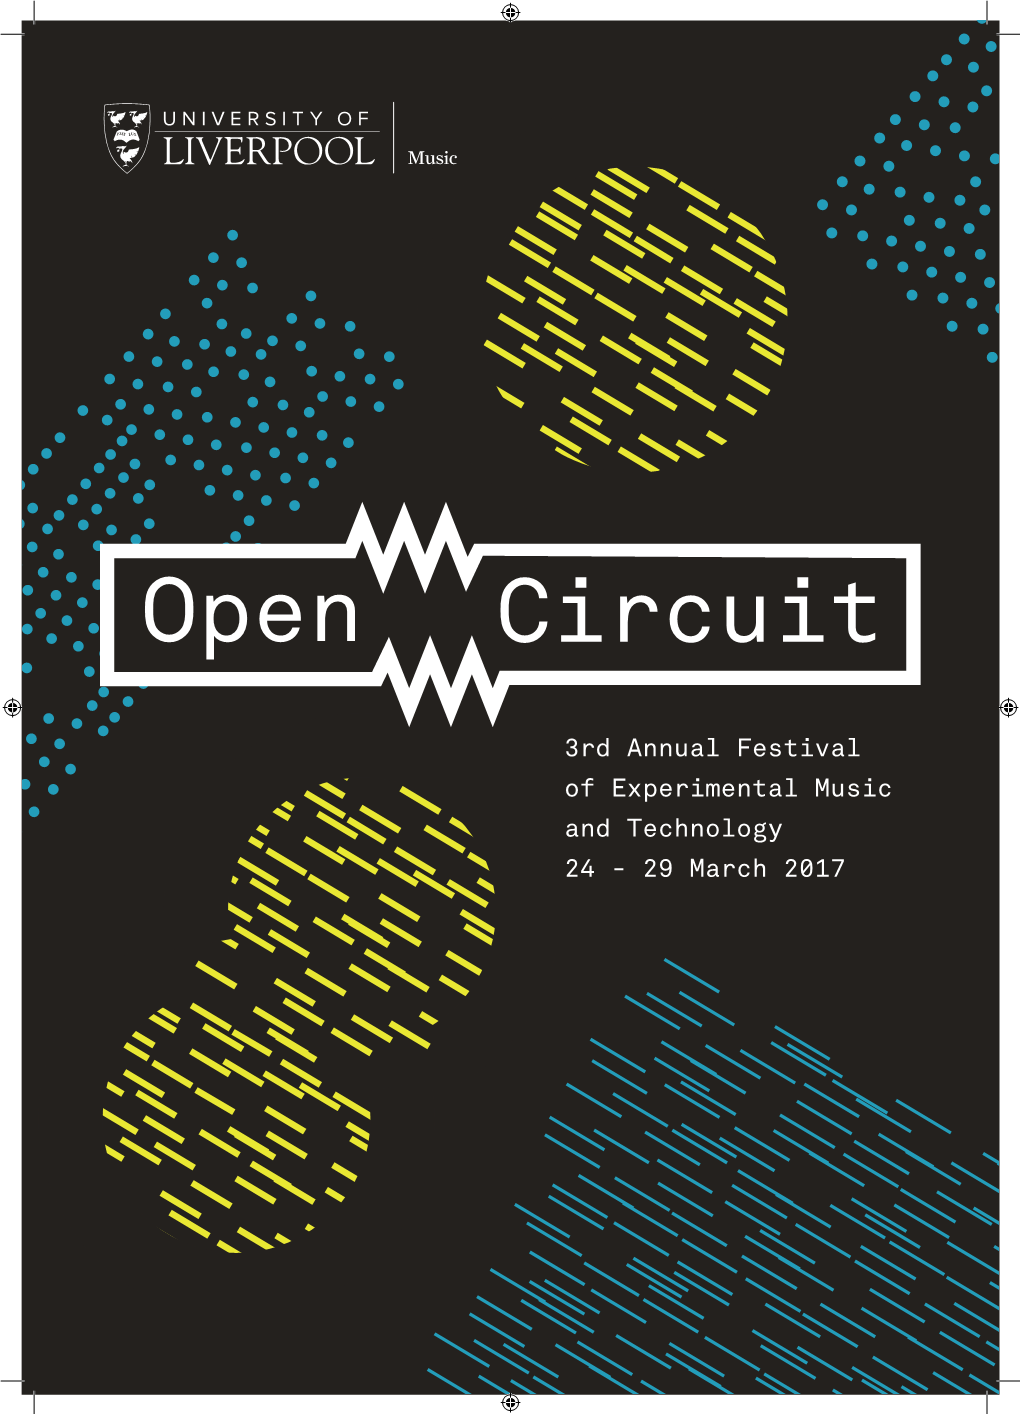 3Rd Annual Festival of Experimental Music and Technology 24 - 29 March 2017 Welcome